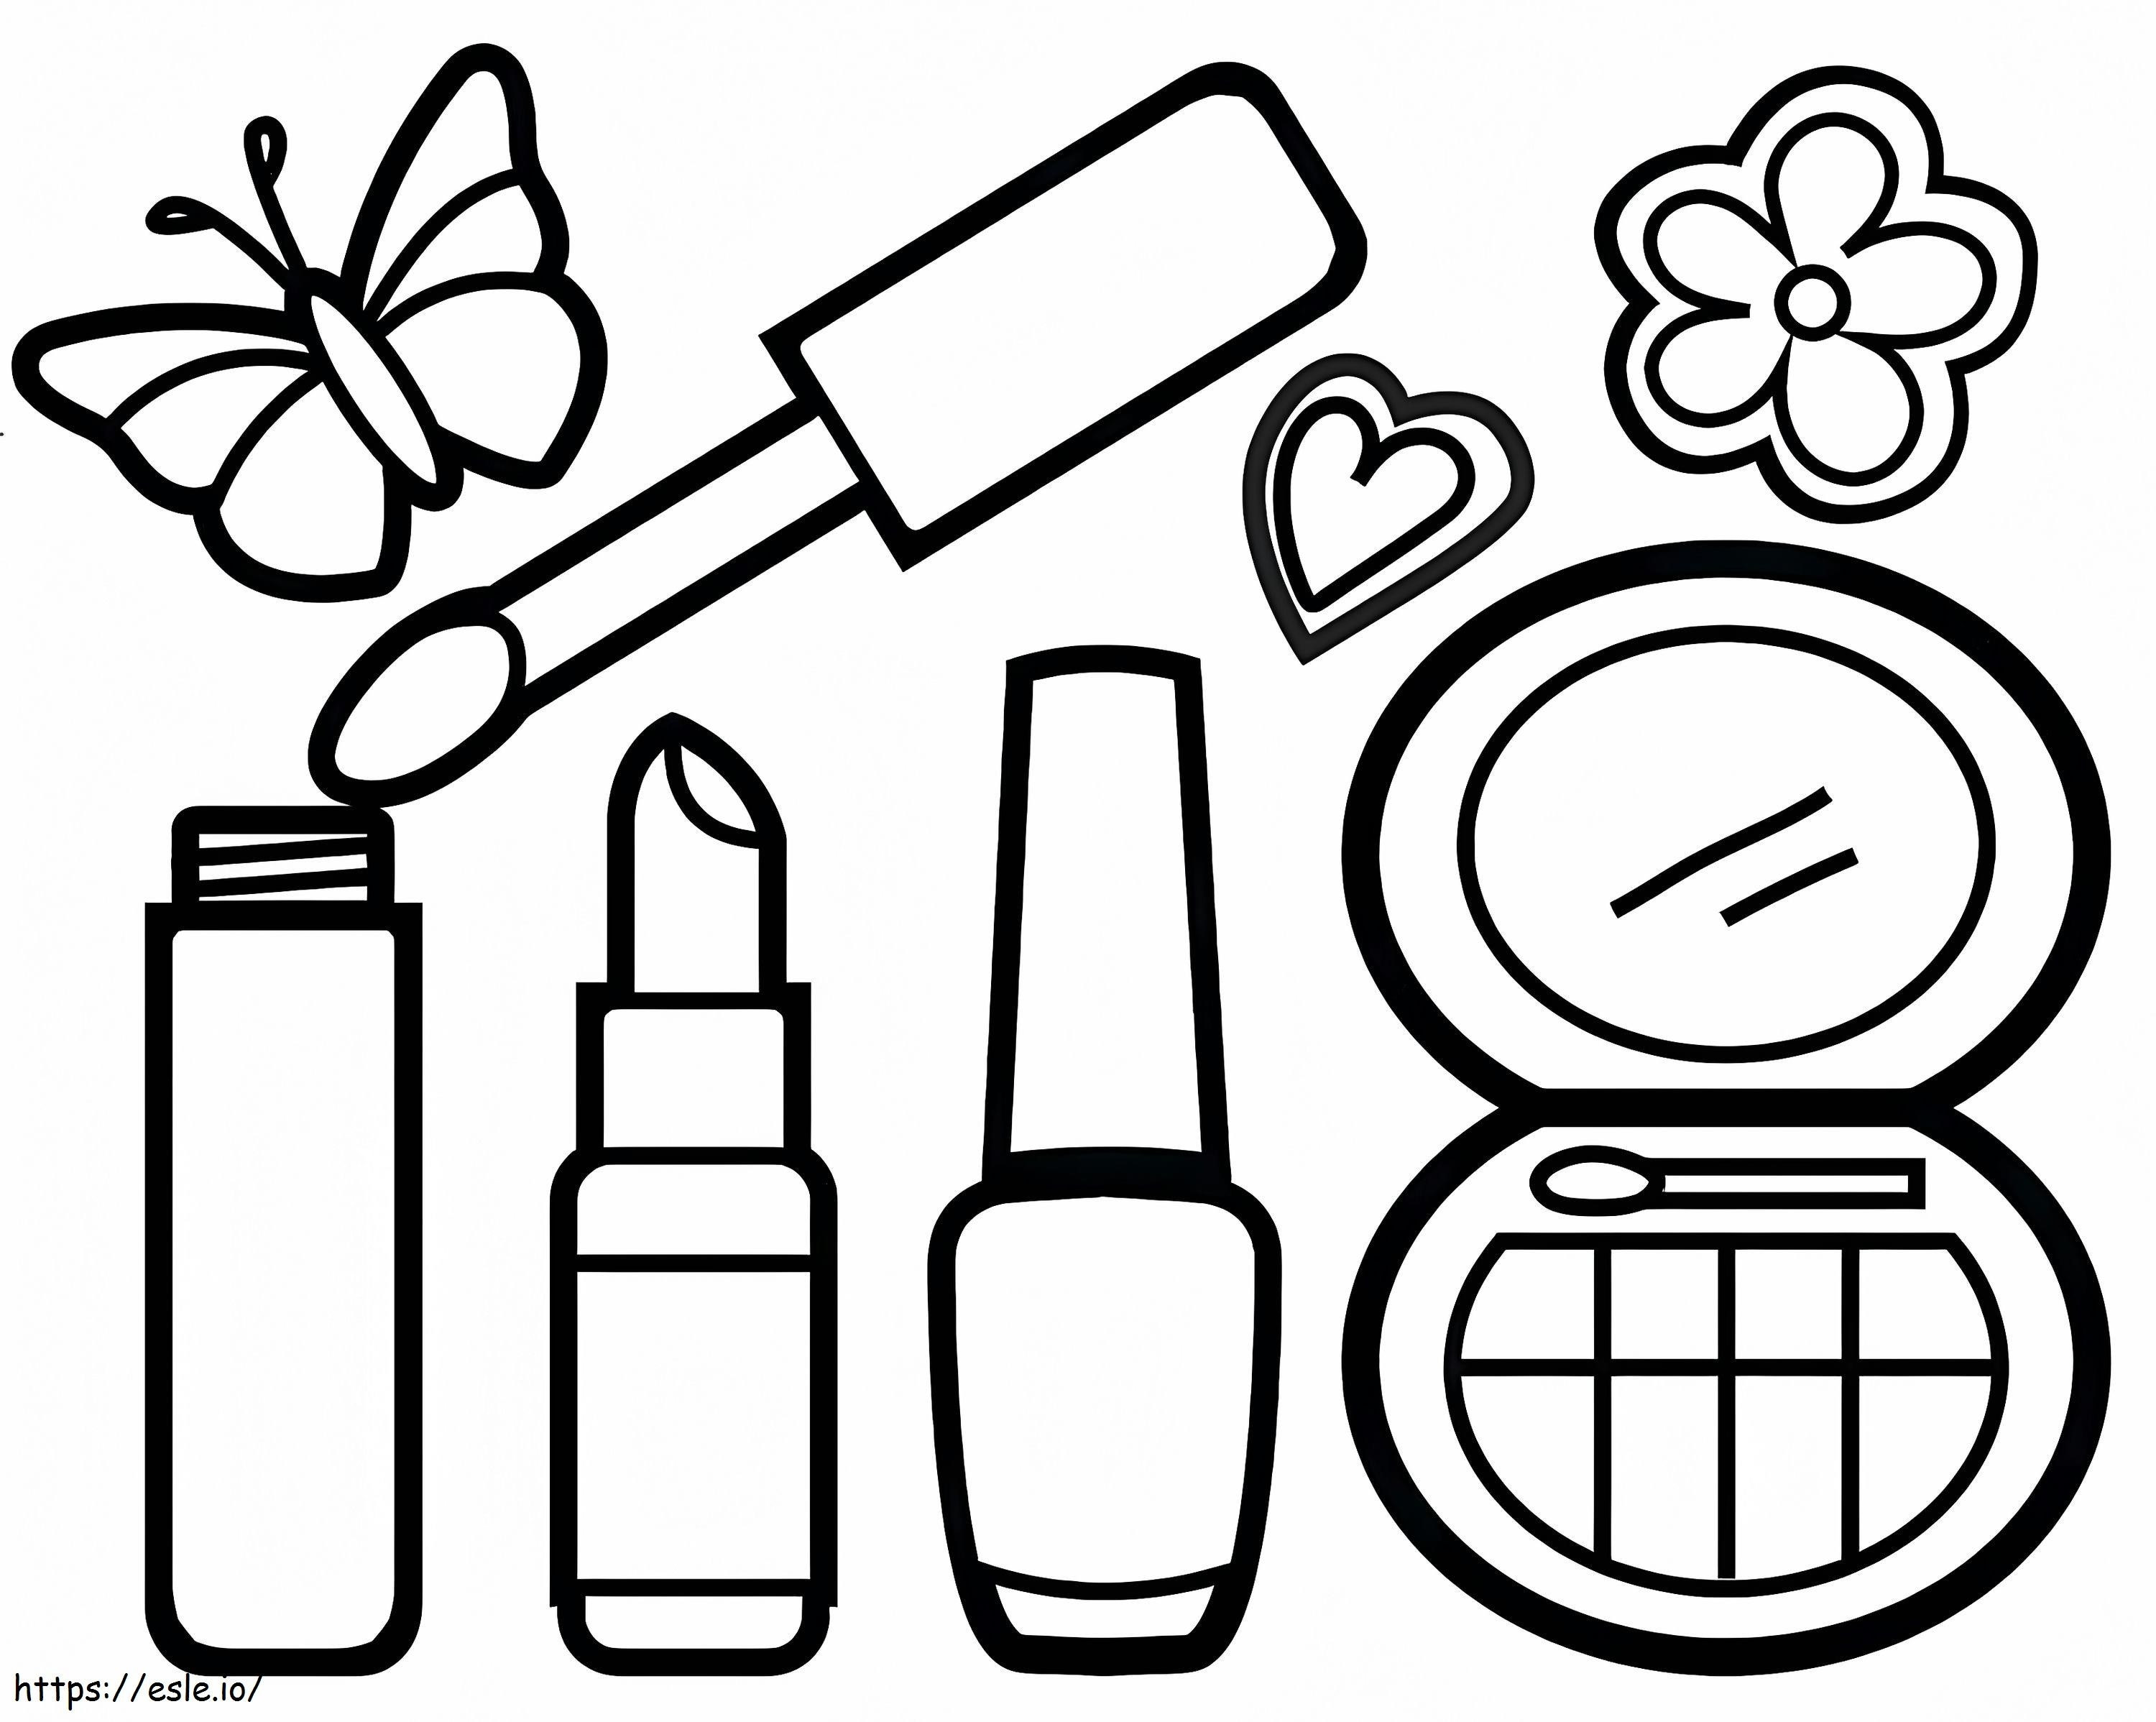 Easy Makeup Kit coloring page